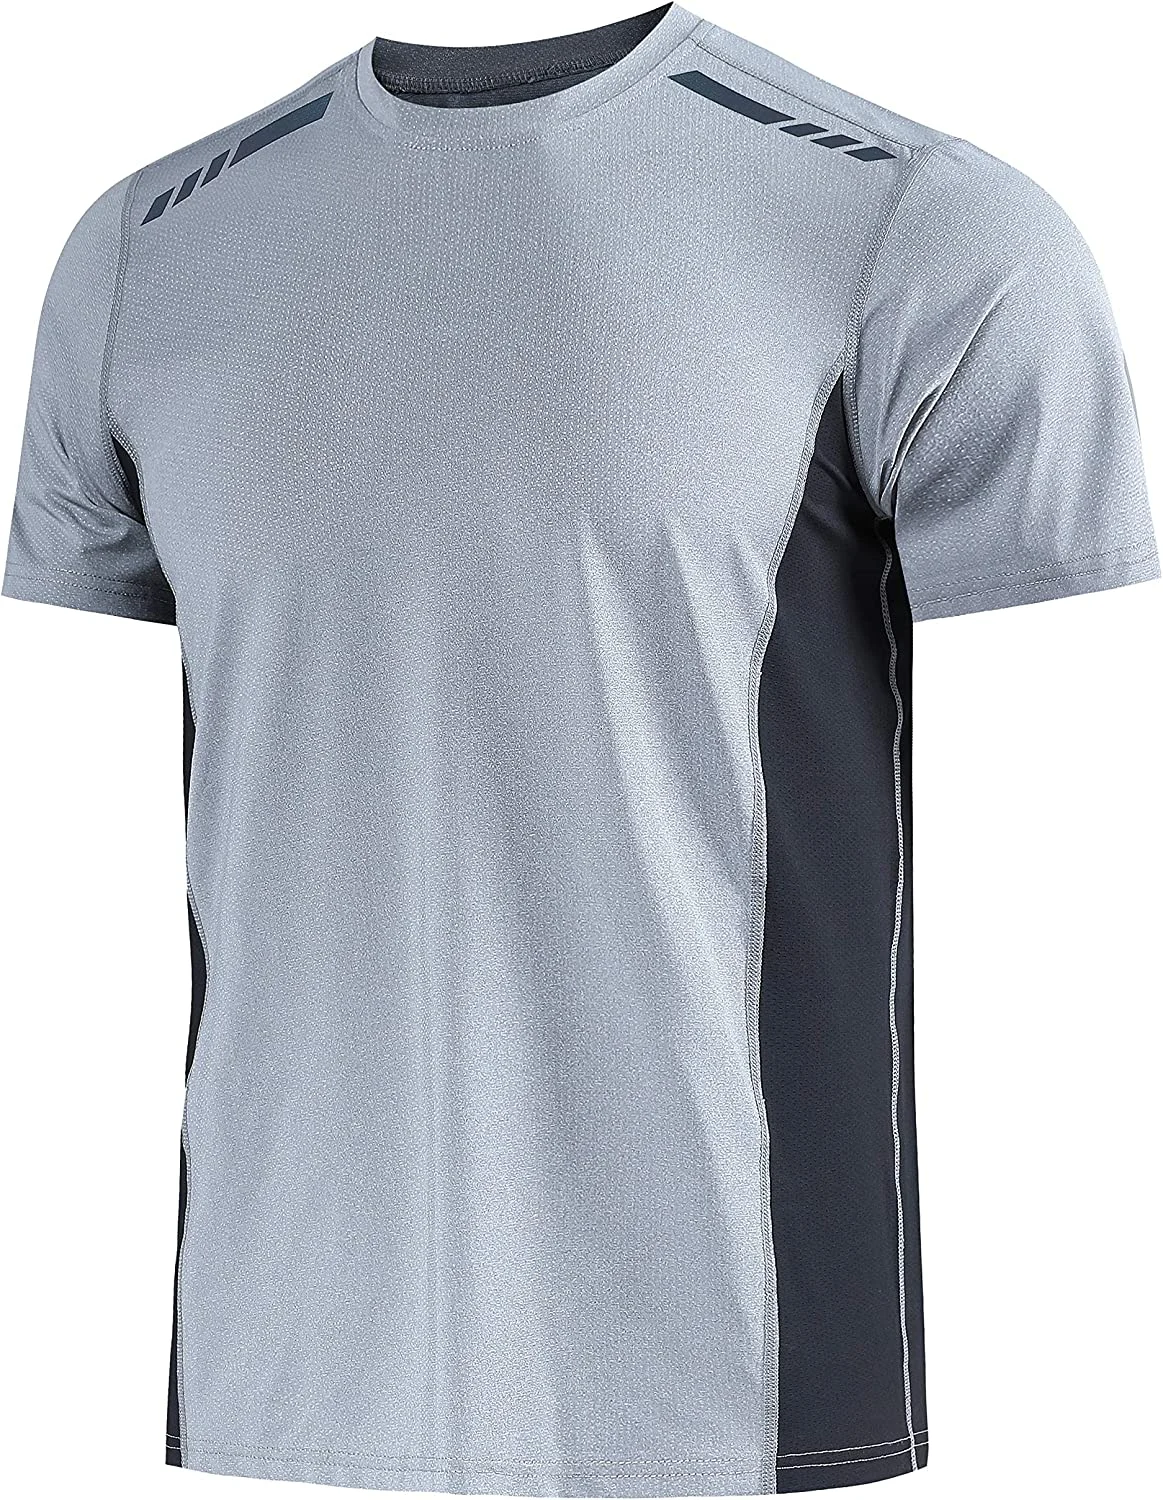 Quick Dry Basketball T Shirt and Breathable Running T Shirt from Bangladesh